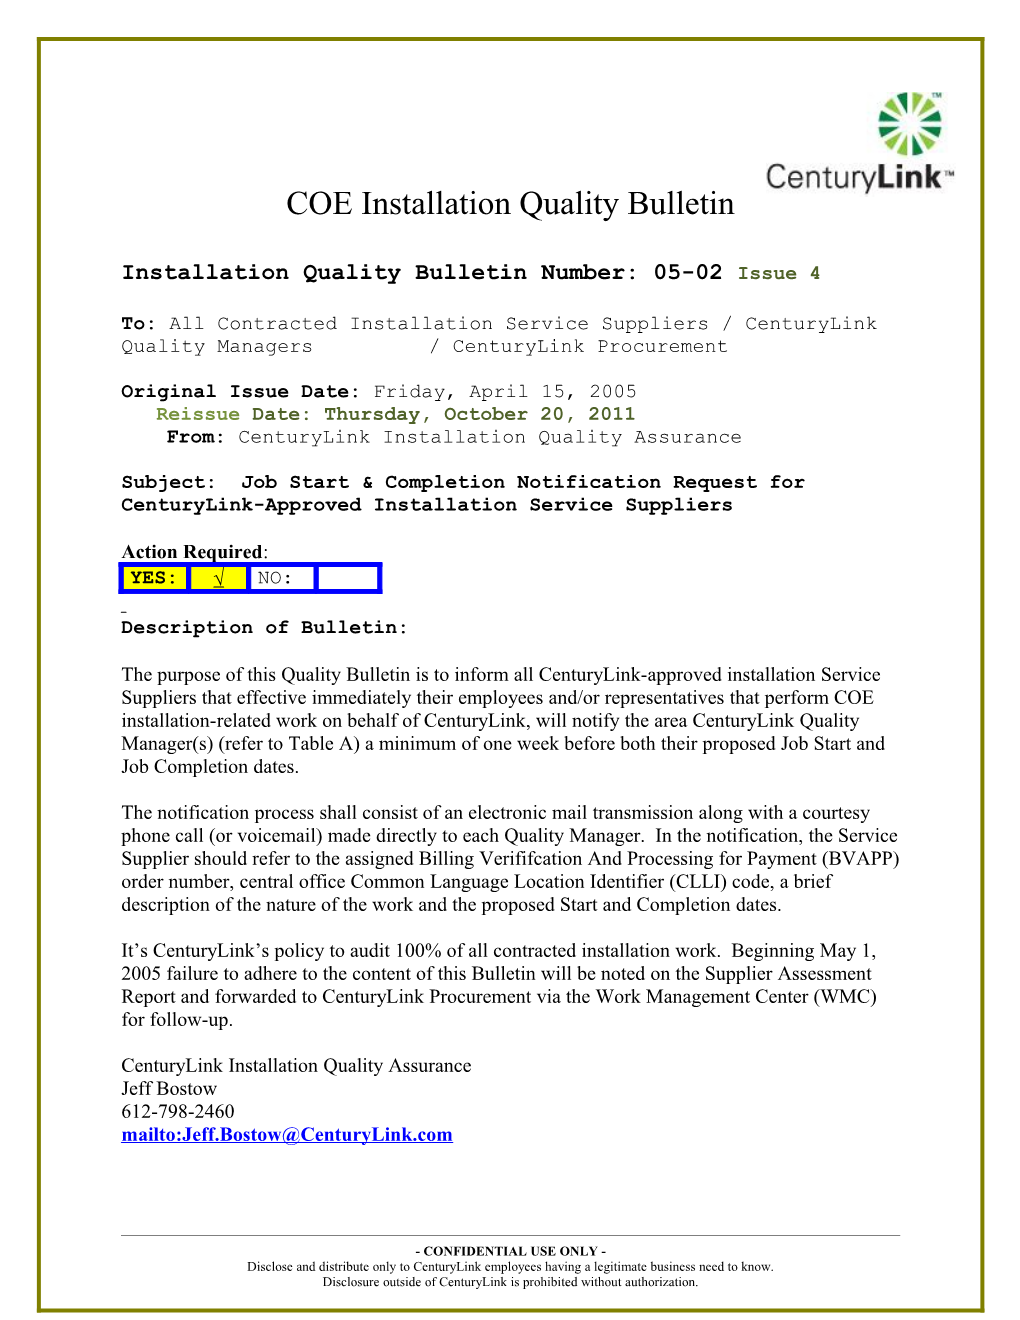 Installation Quality Bulletin Number: 05-02 Issue 4